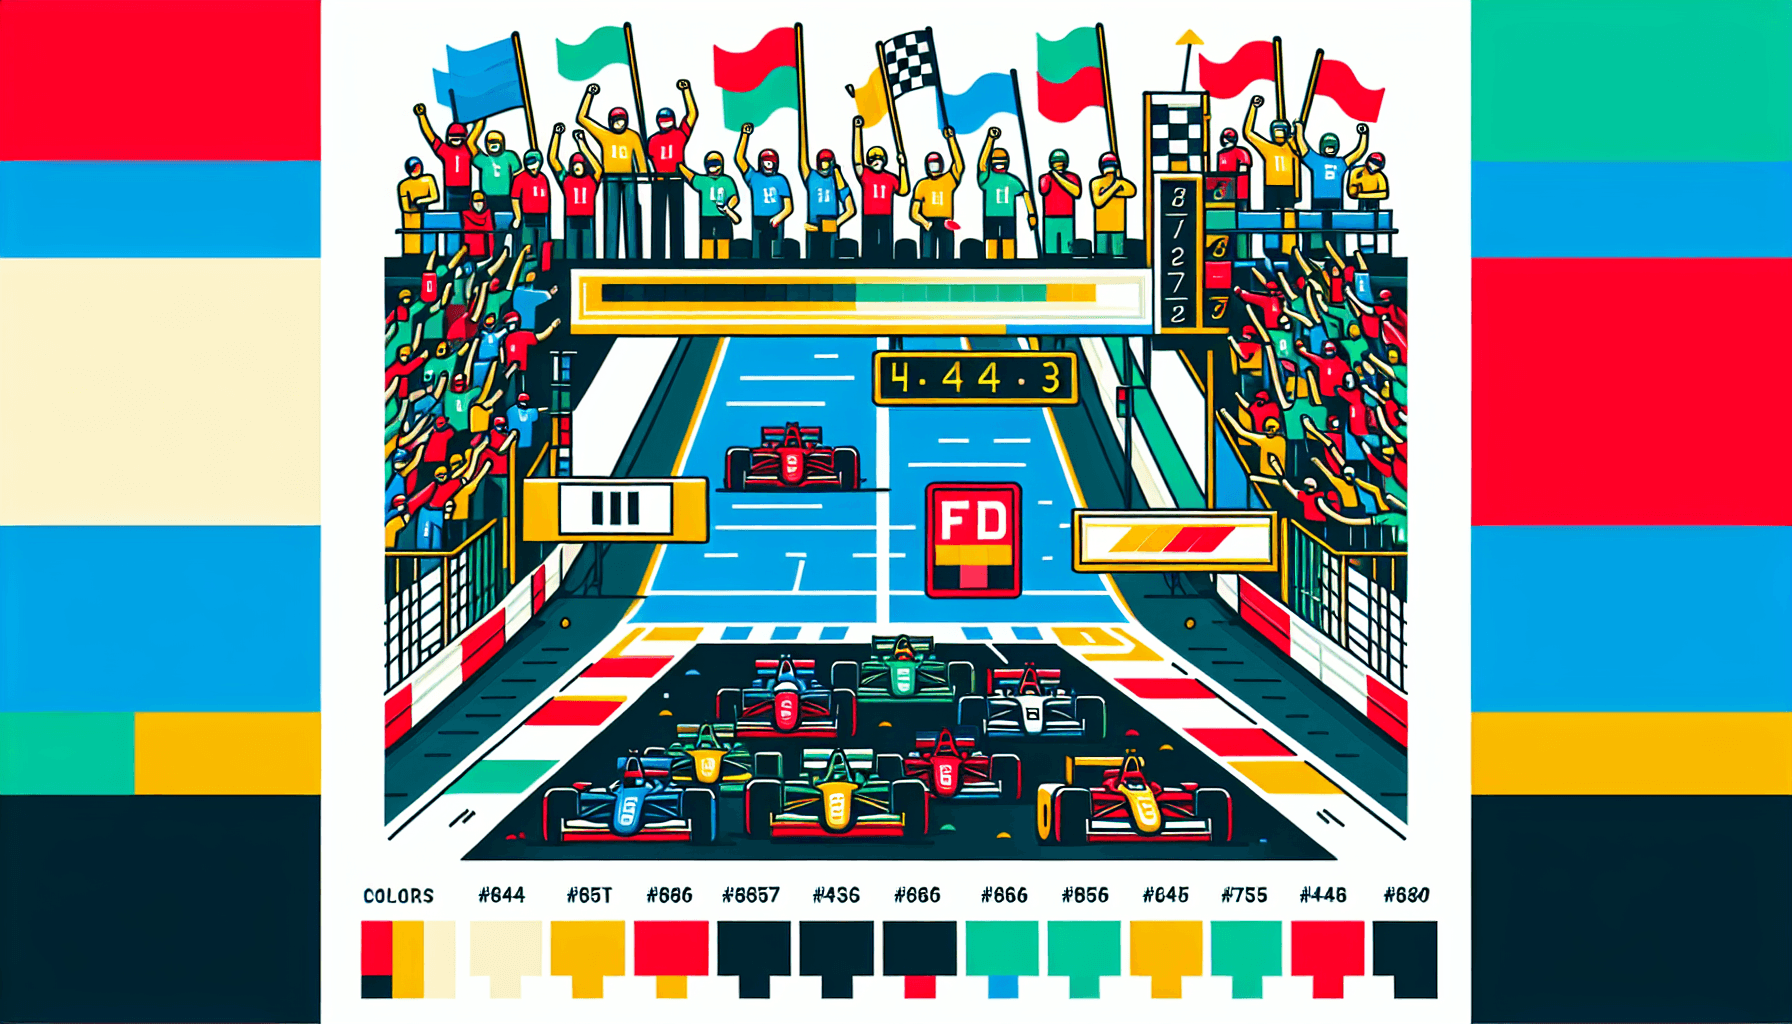 Race track in flat illustration style and white background, red #f47574, green #88c7a8, yellow #fcc44b, and blue #645bc8 colors.